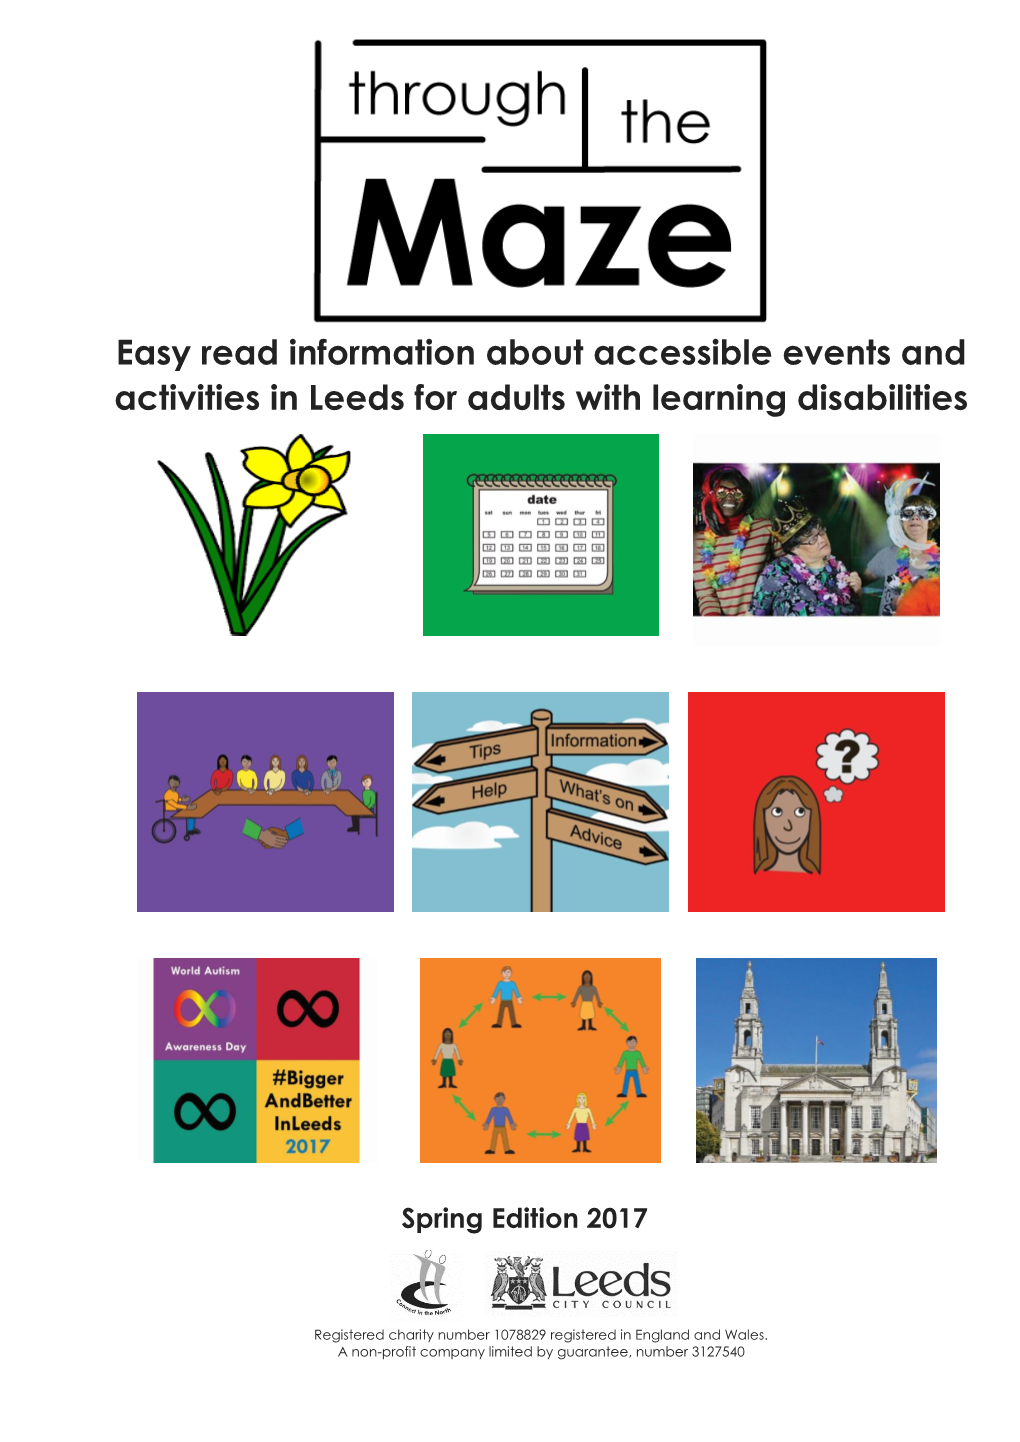 Easy Read Information About Accessible Events and Activities in Leeds for Adults with Learning Disabilities